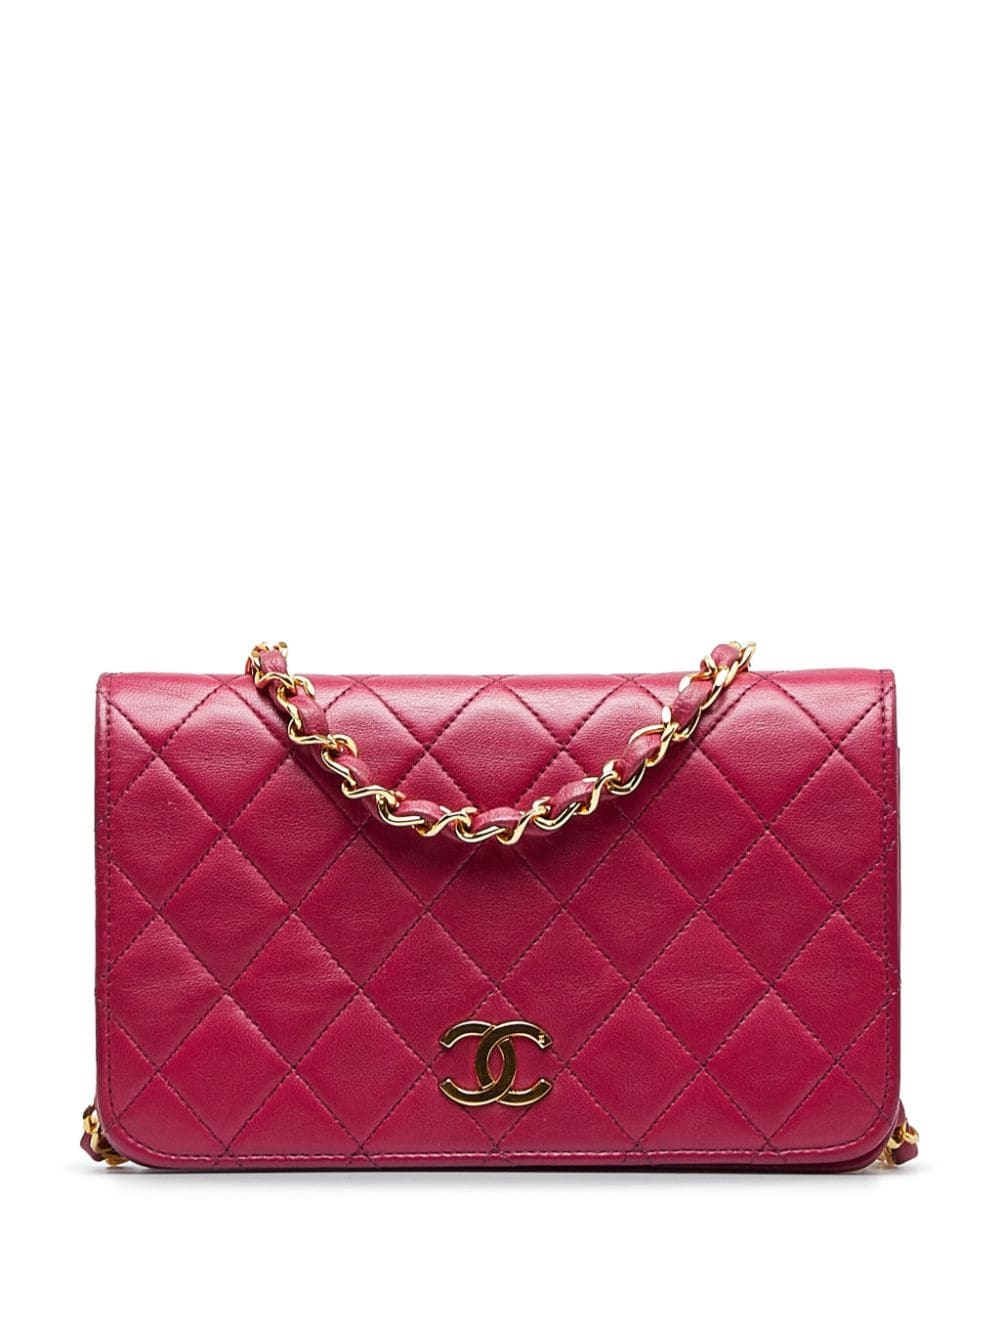 Pre-owned Chanel Cc Matelasse Lambskin Flap In Pink